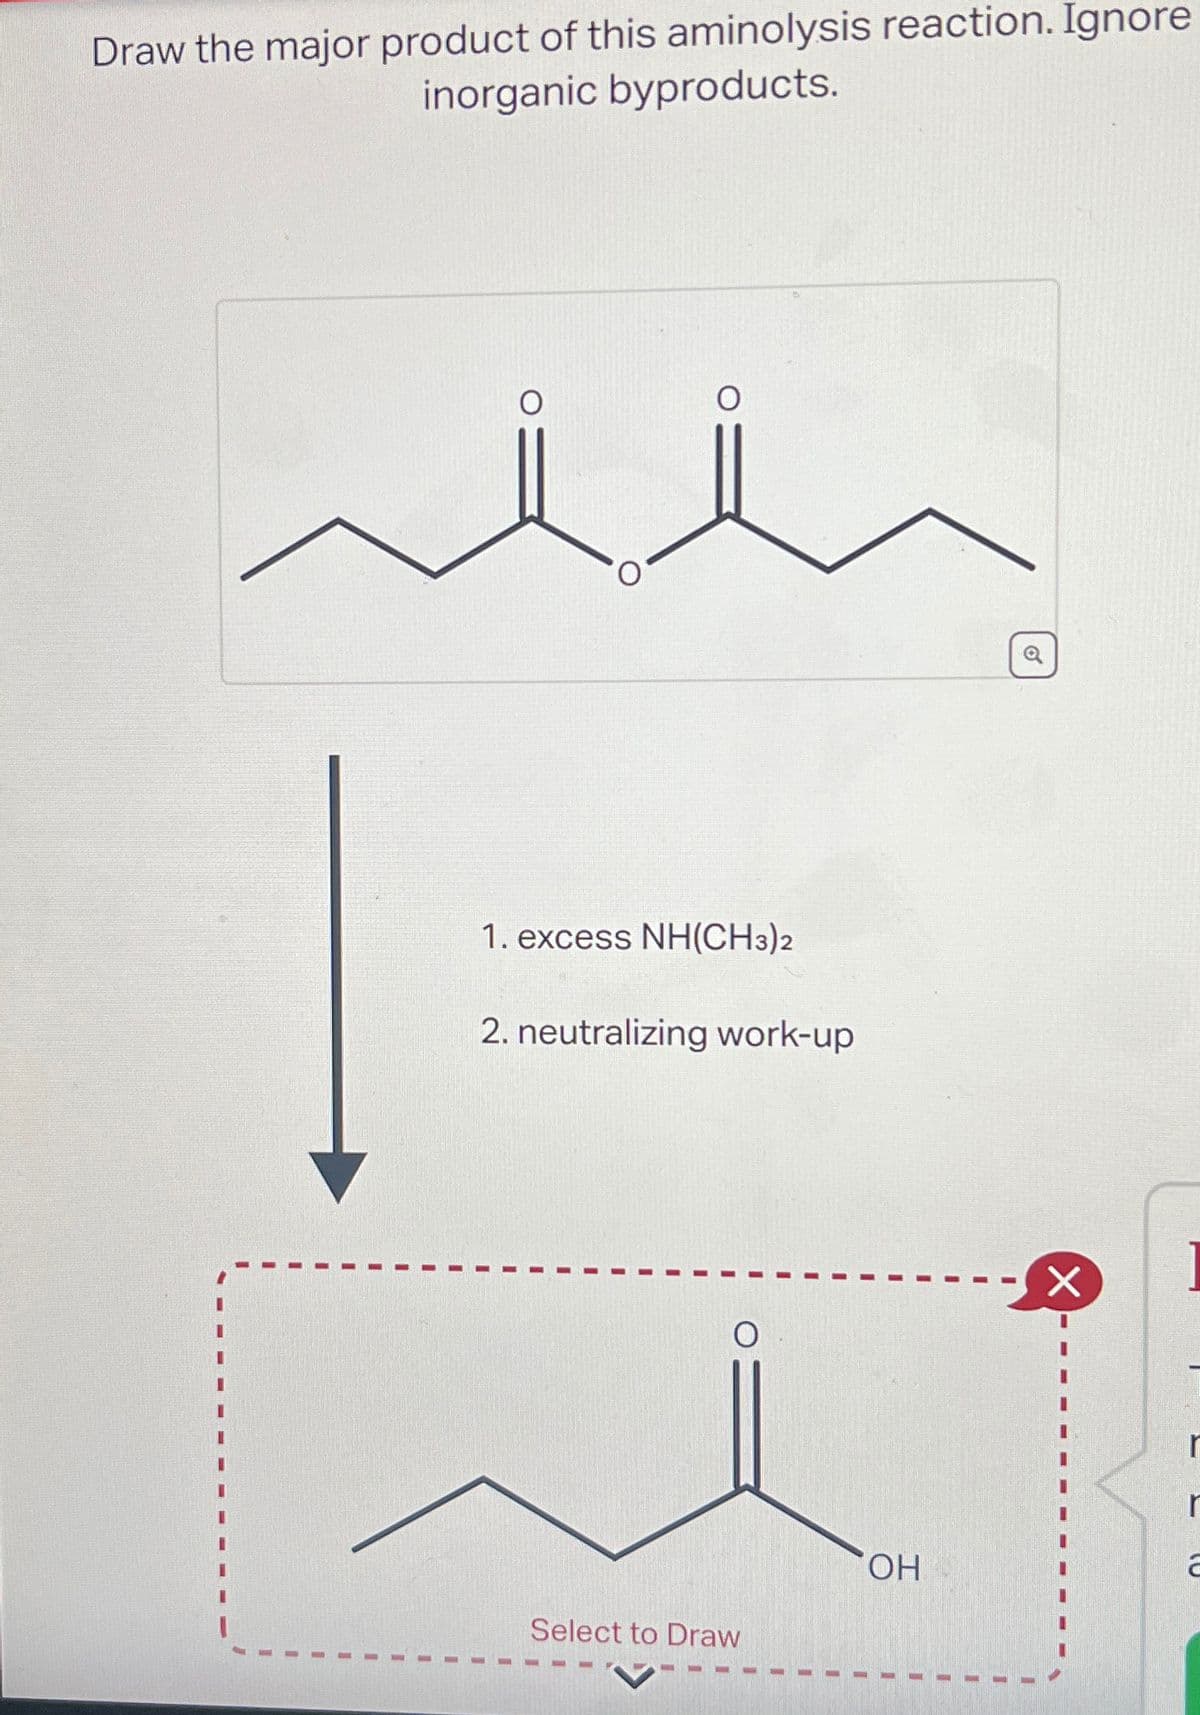 Draw the major product of this aminolysis reaction. Ignore
inorganic byproducts.
1. excess NH(CH3)2
2. neutralizing work-up
Select to Draw
0
☑
r
OH
a